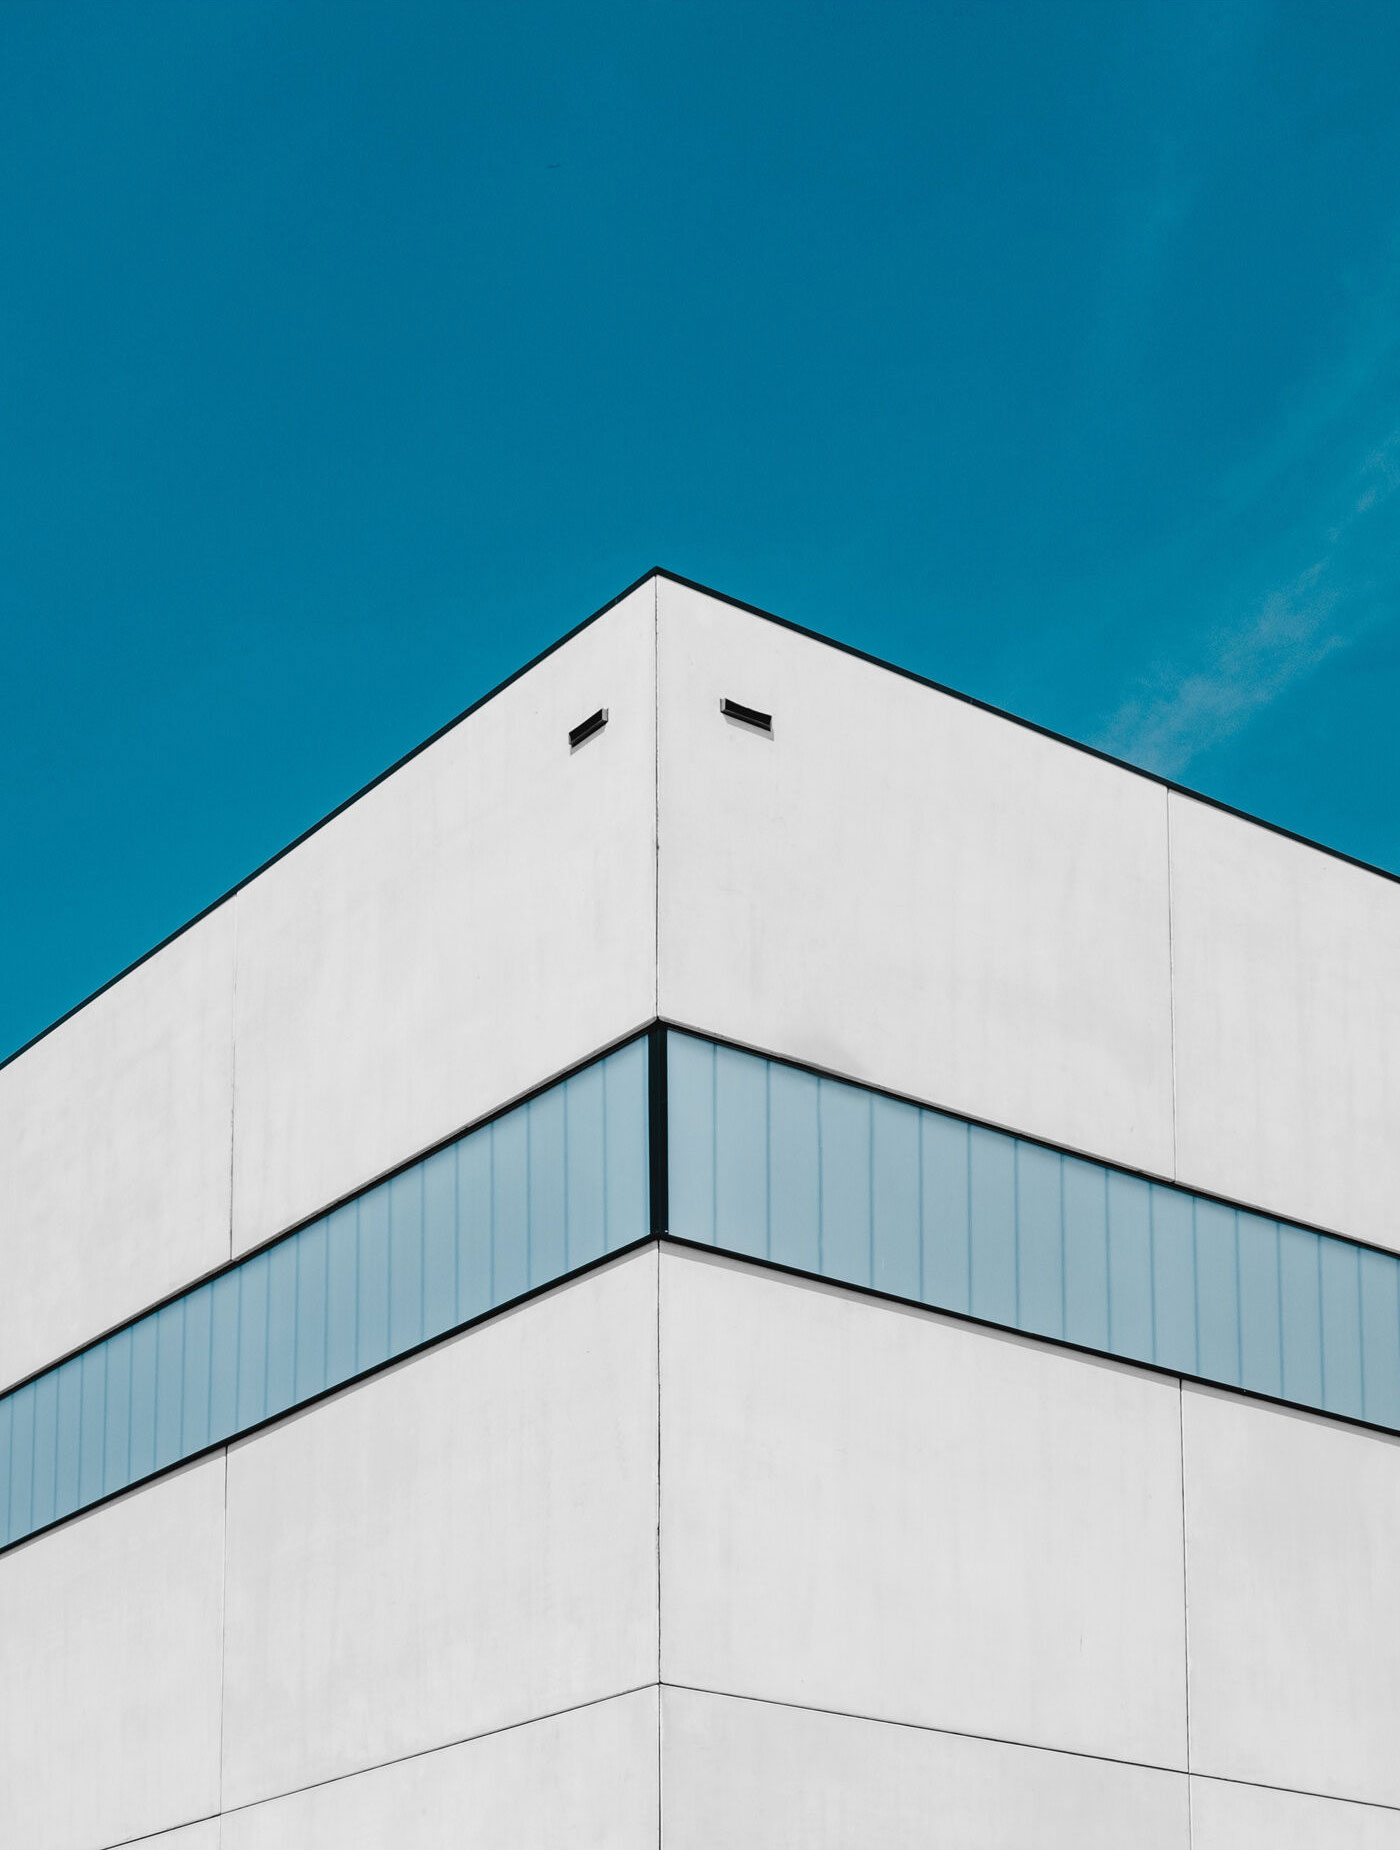 Corner View of Building with White Walls Mockup FREE PSD